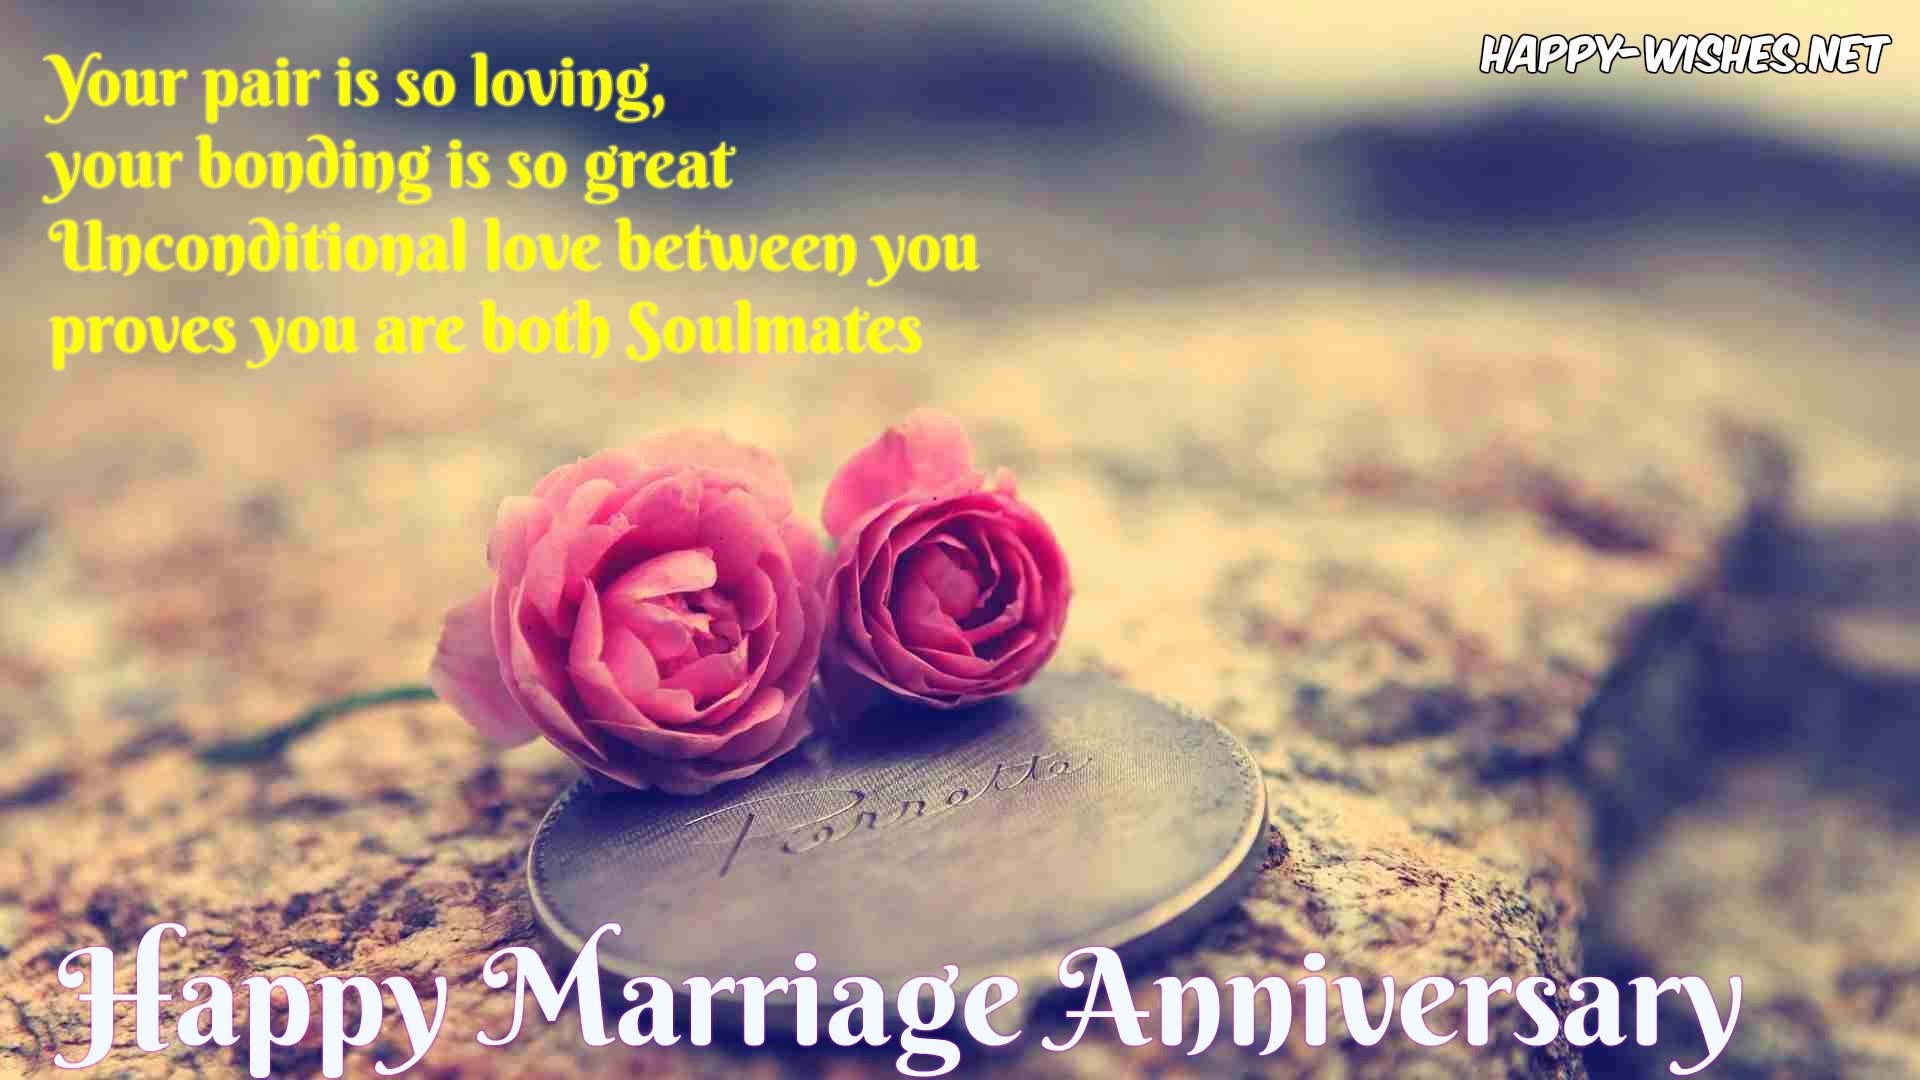 Happy Anniversary Messages Wishes